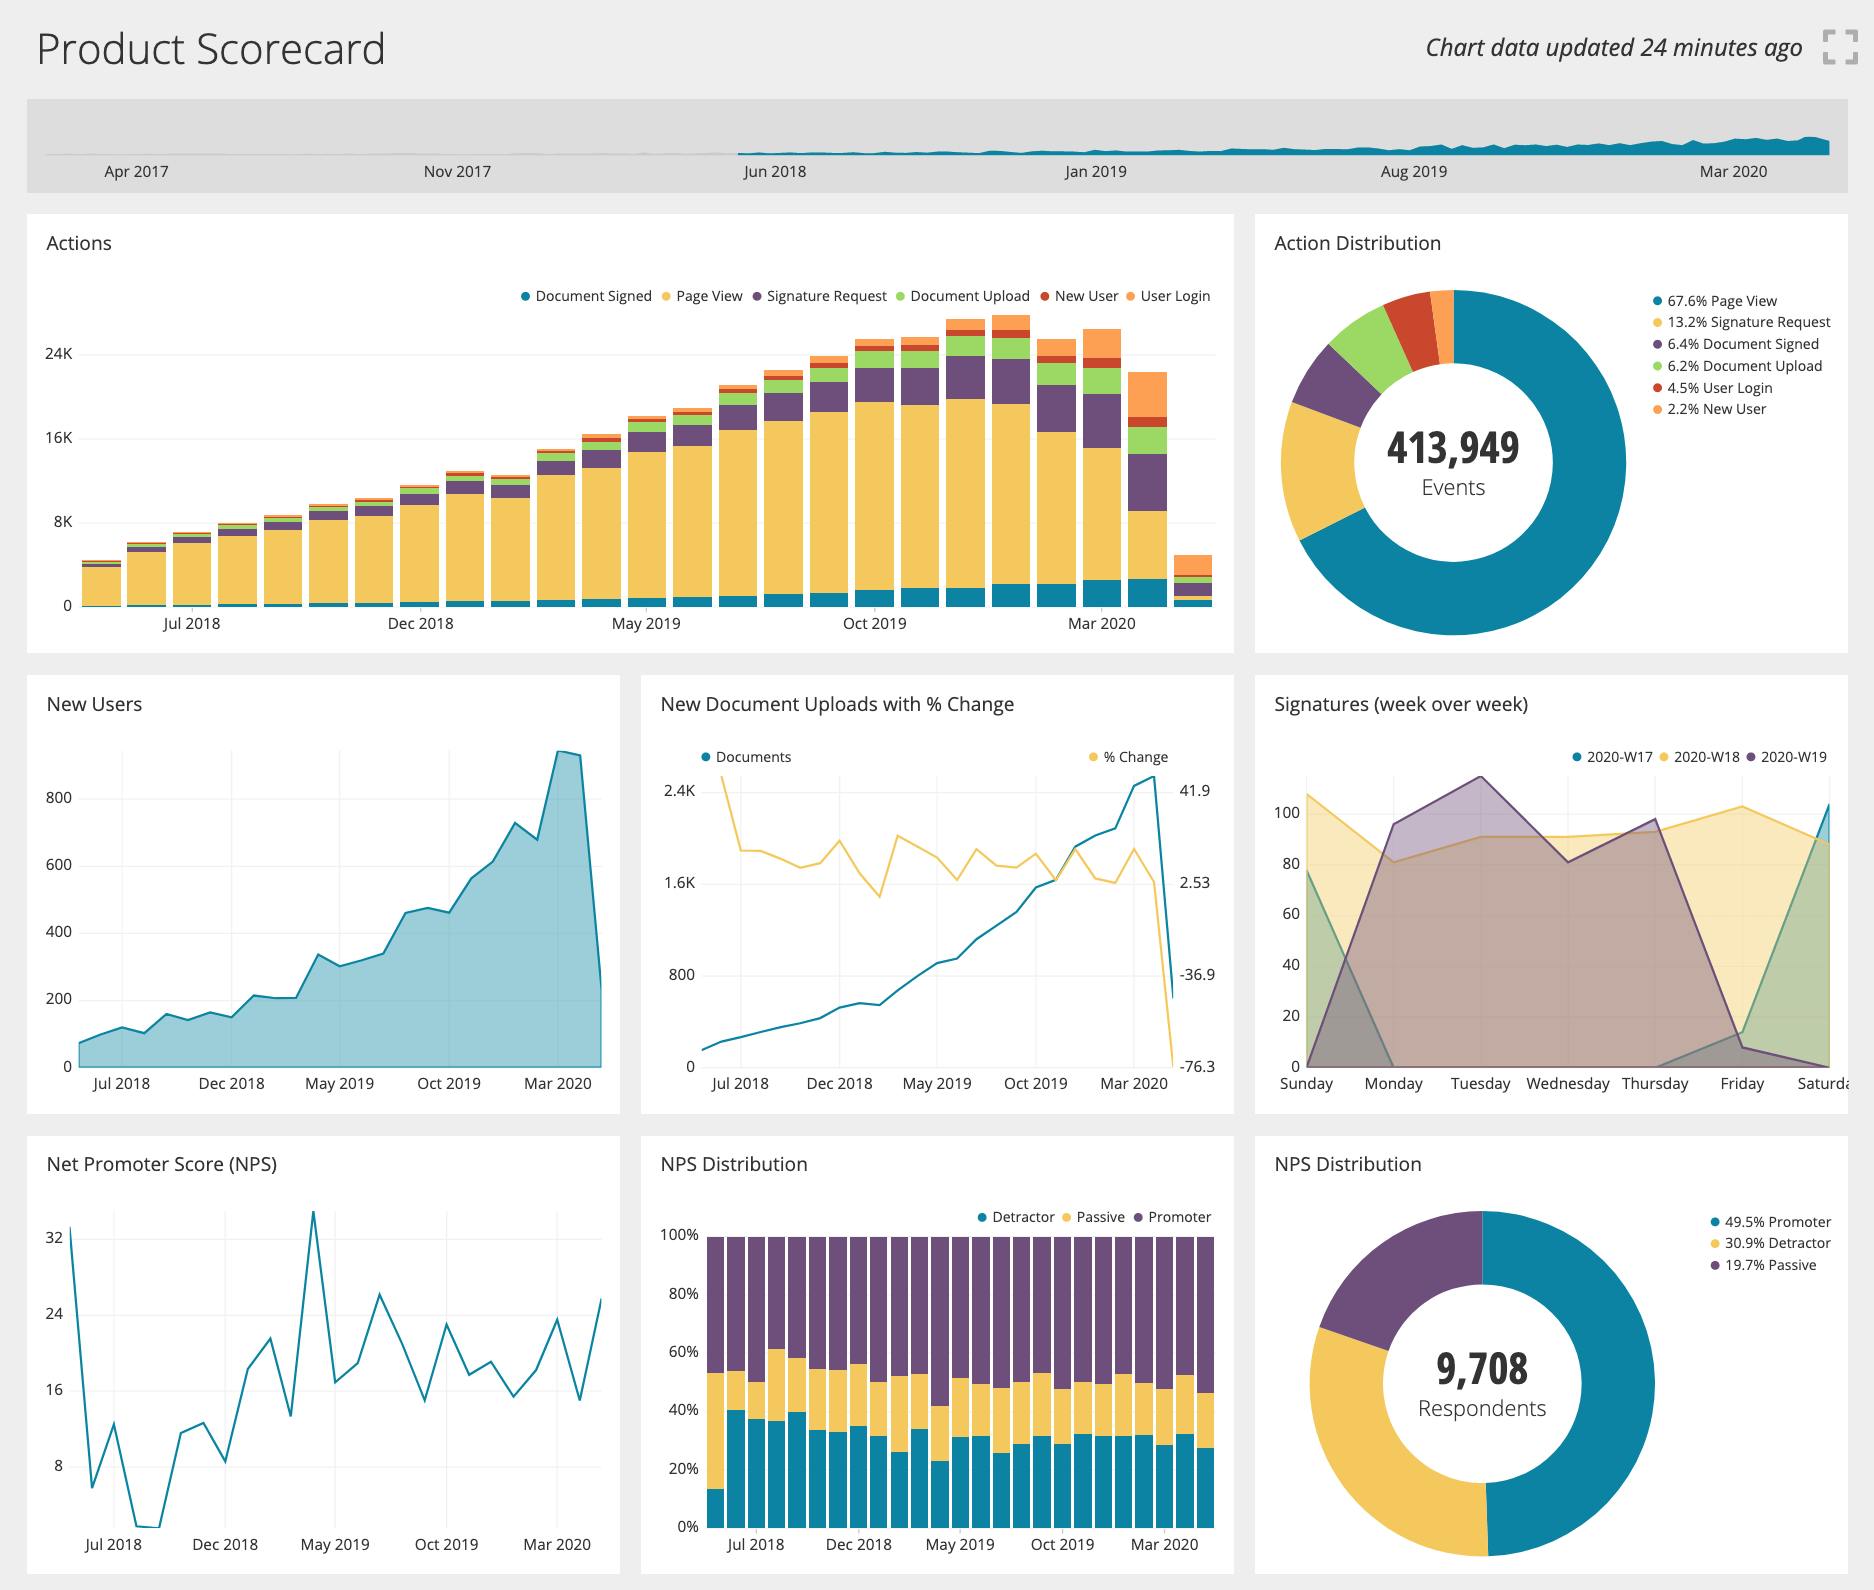 screenshot of dynamic product scorecard dashboard with data visualization showing actions, action distribution, new users, and NPS